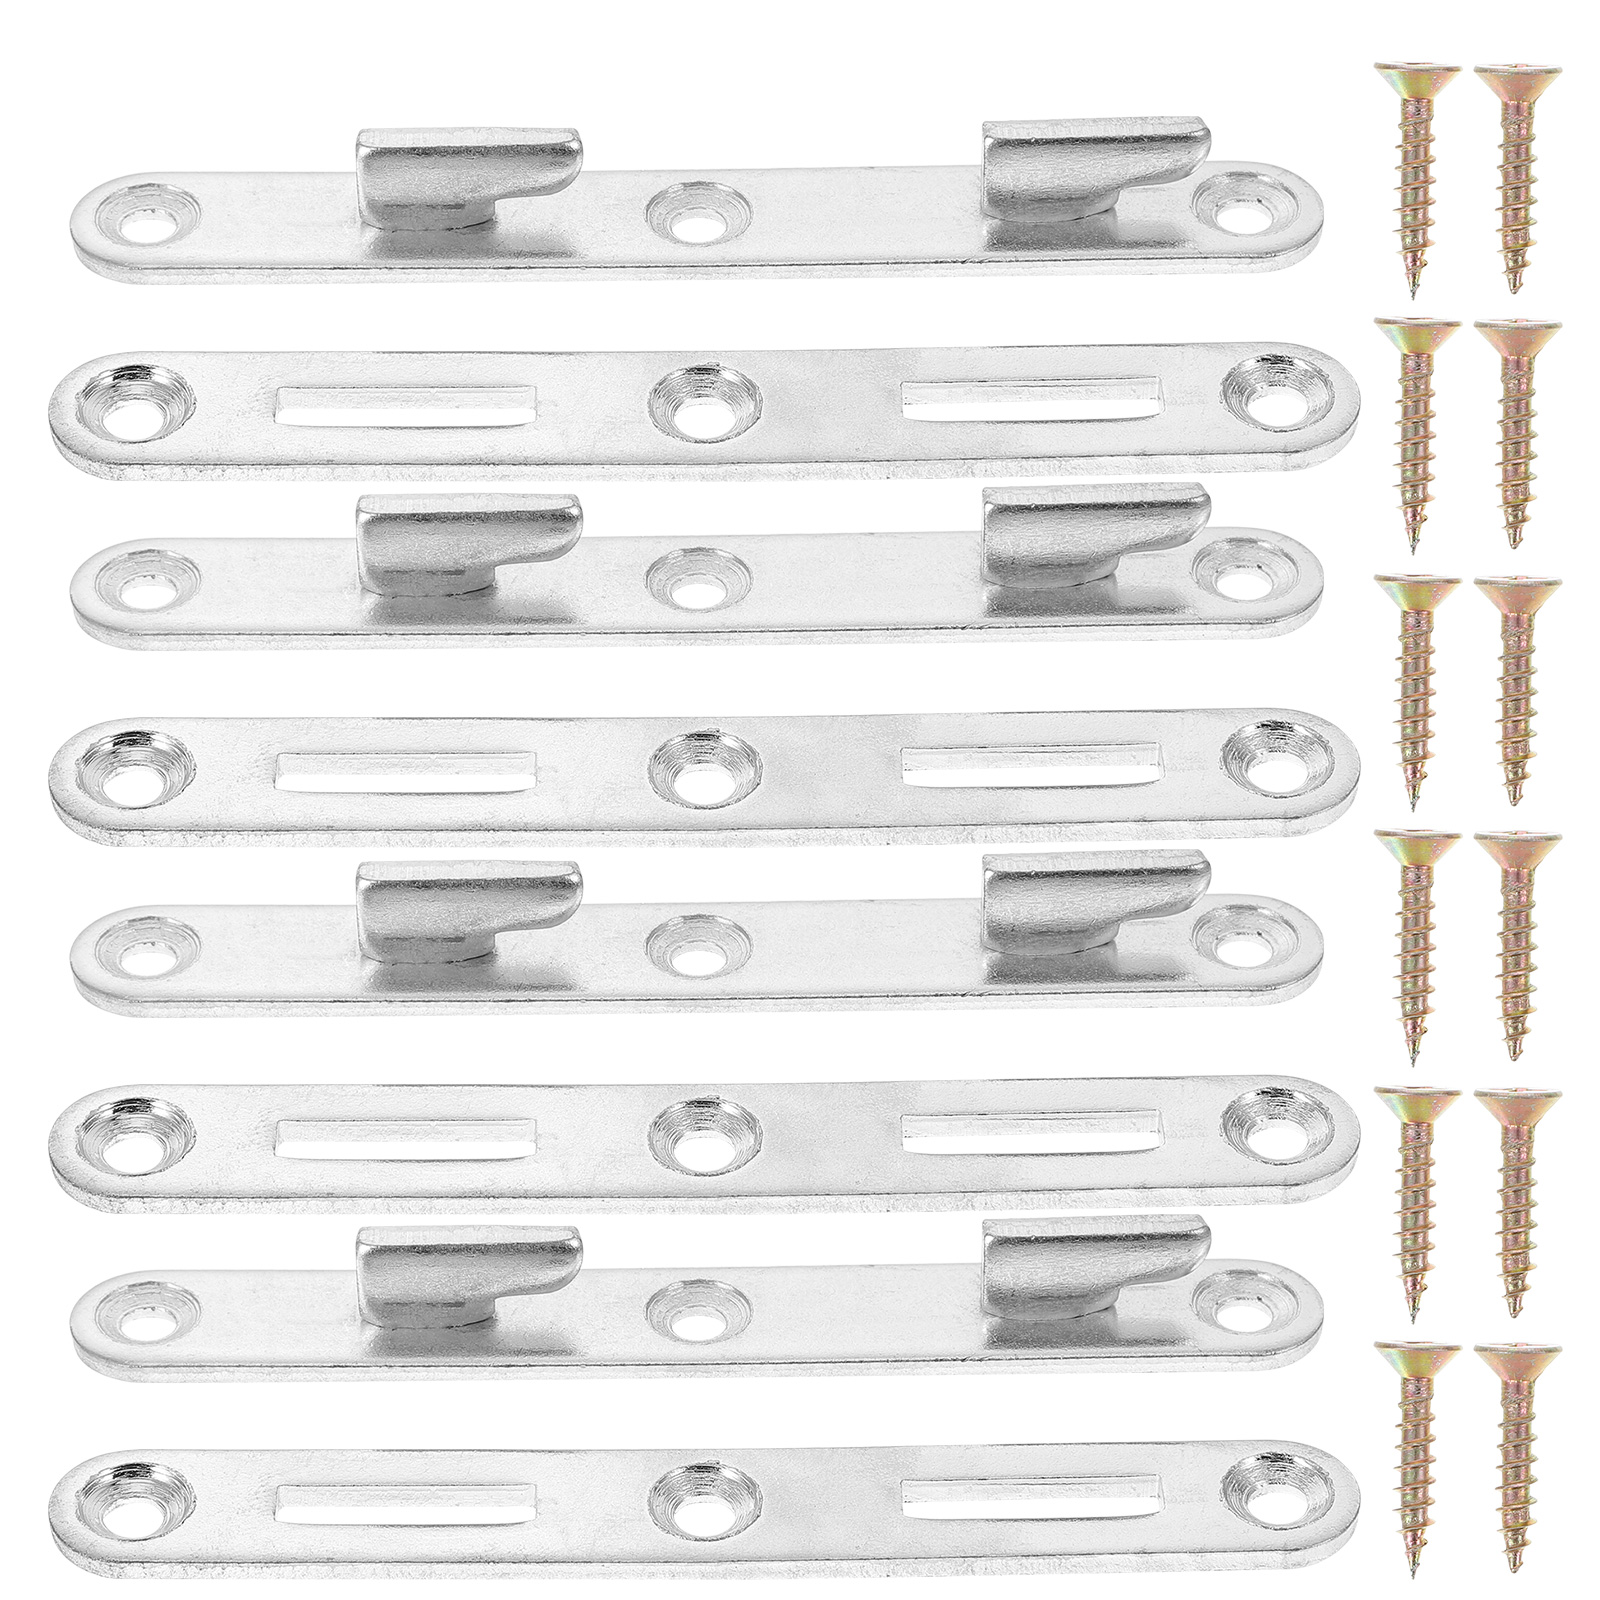 Bed Rail Brackets Fittings Frame Wood Furniture Brackets Hook Connectinghardwares Support Mounting Footboard Headboard - image 4 of 6